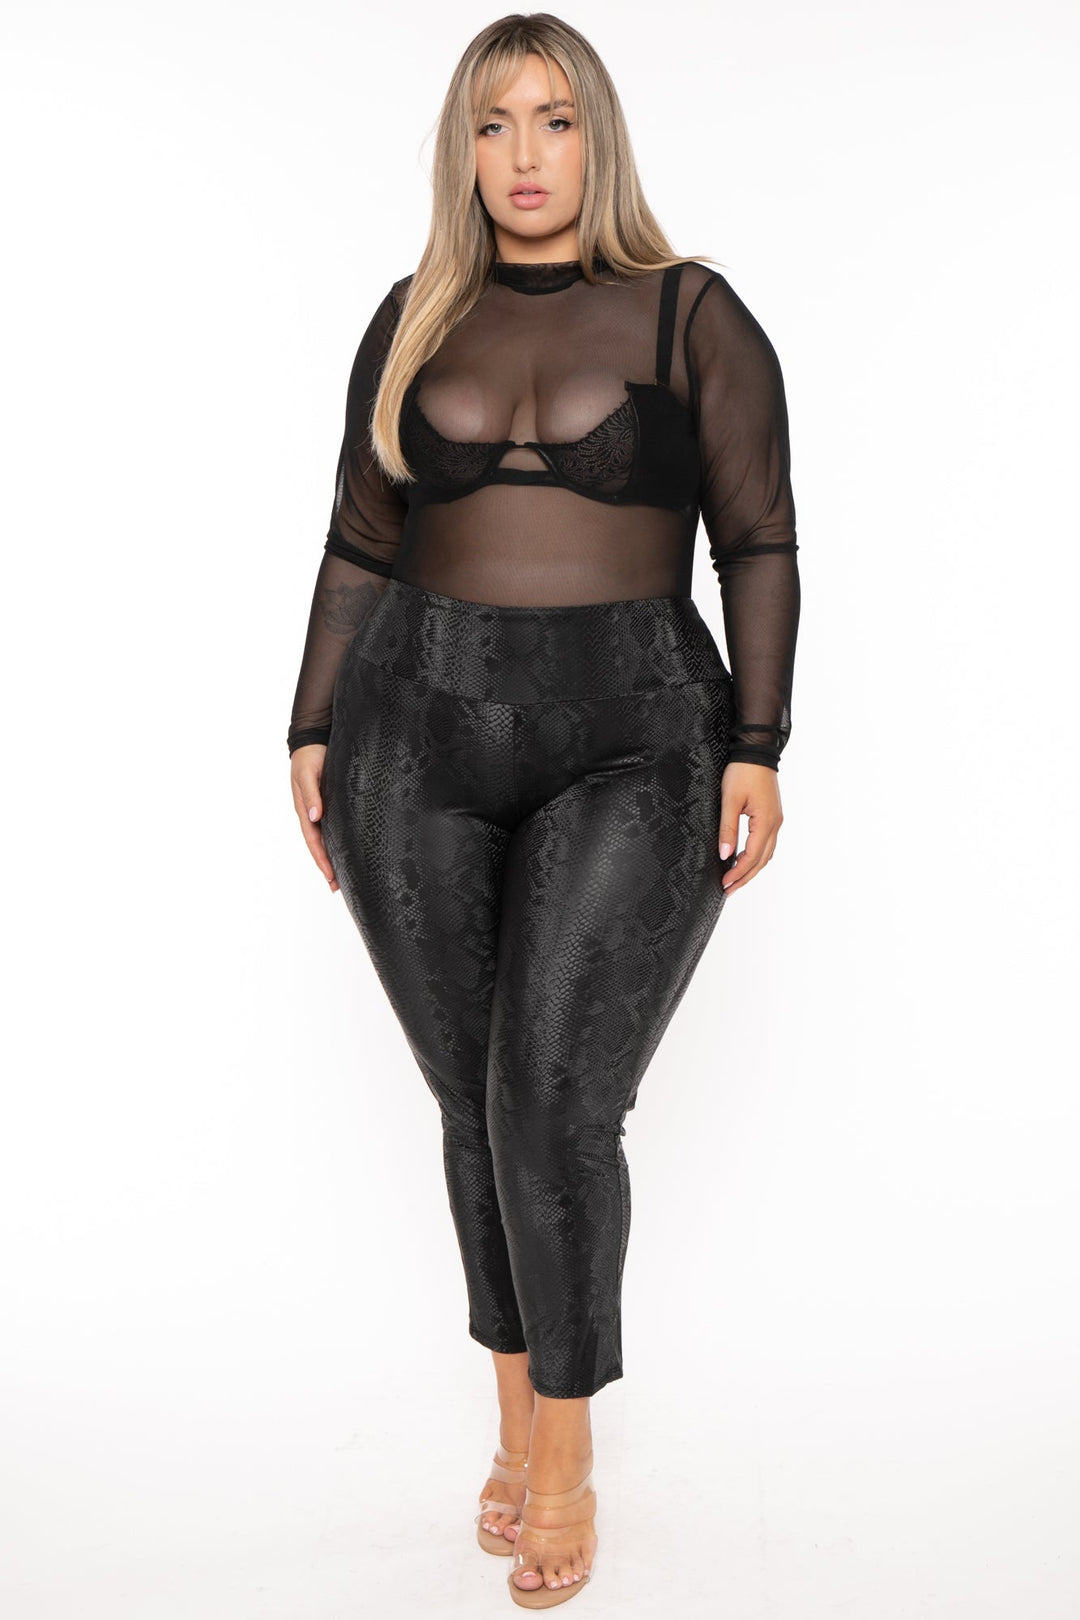 Plus Size Tights - The Big Tights Company